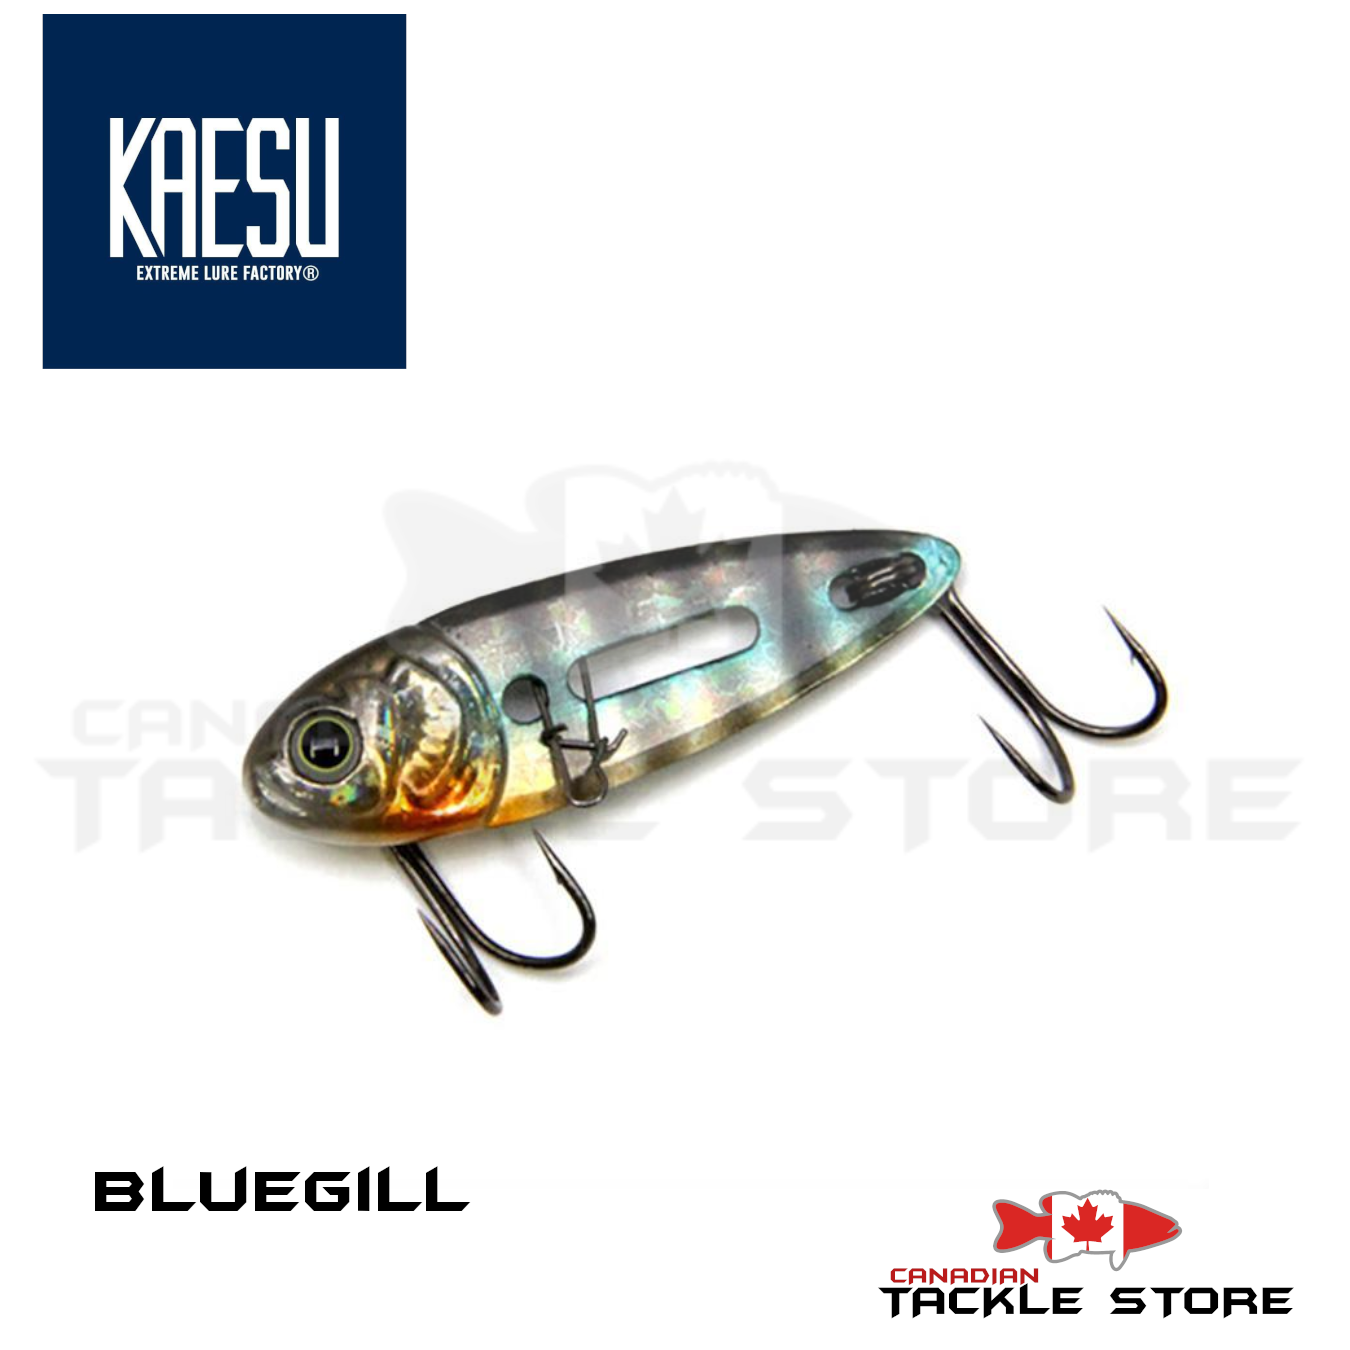 PLAT/duo rough trail bubbly 185f flying fish cya0861 sold out/lure